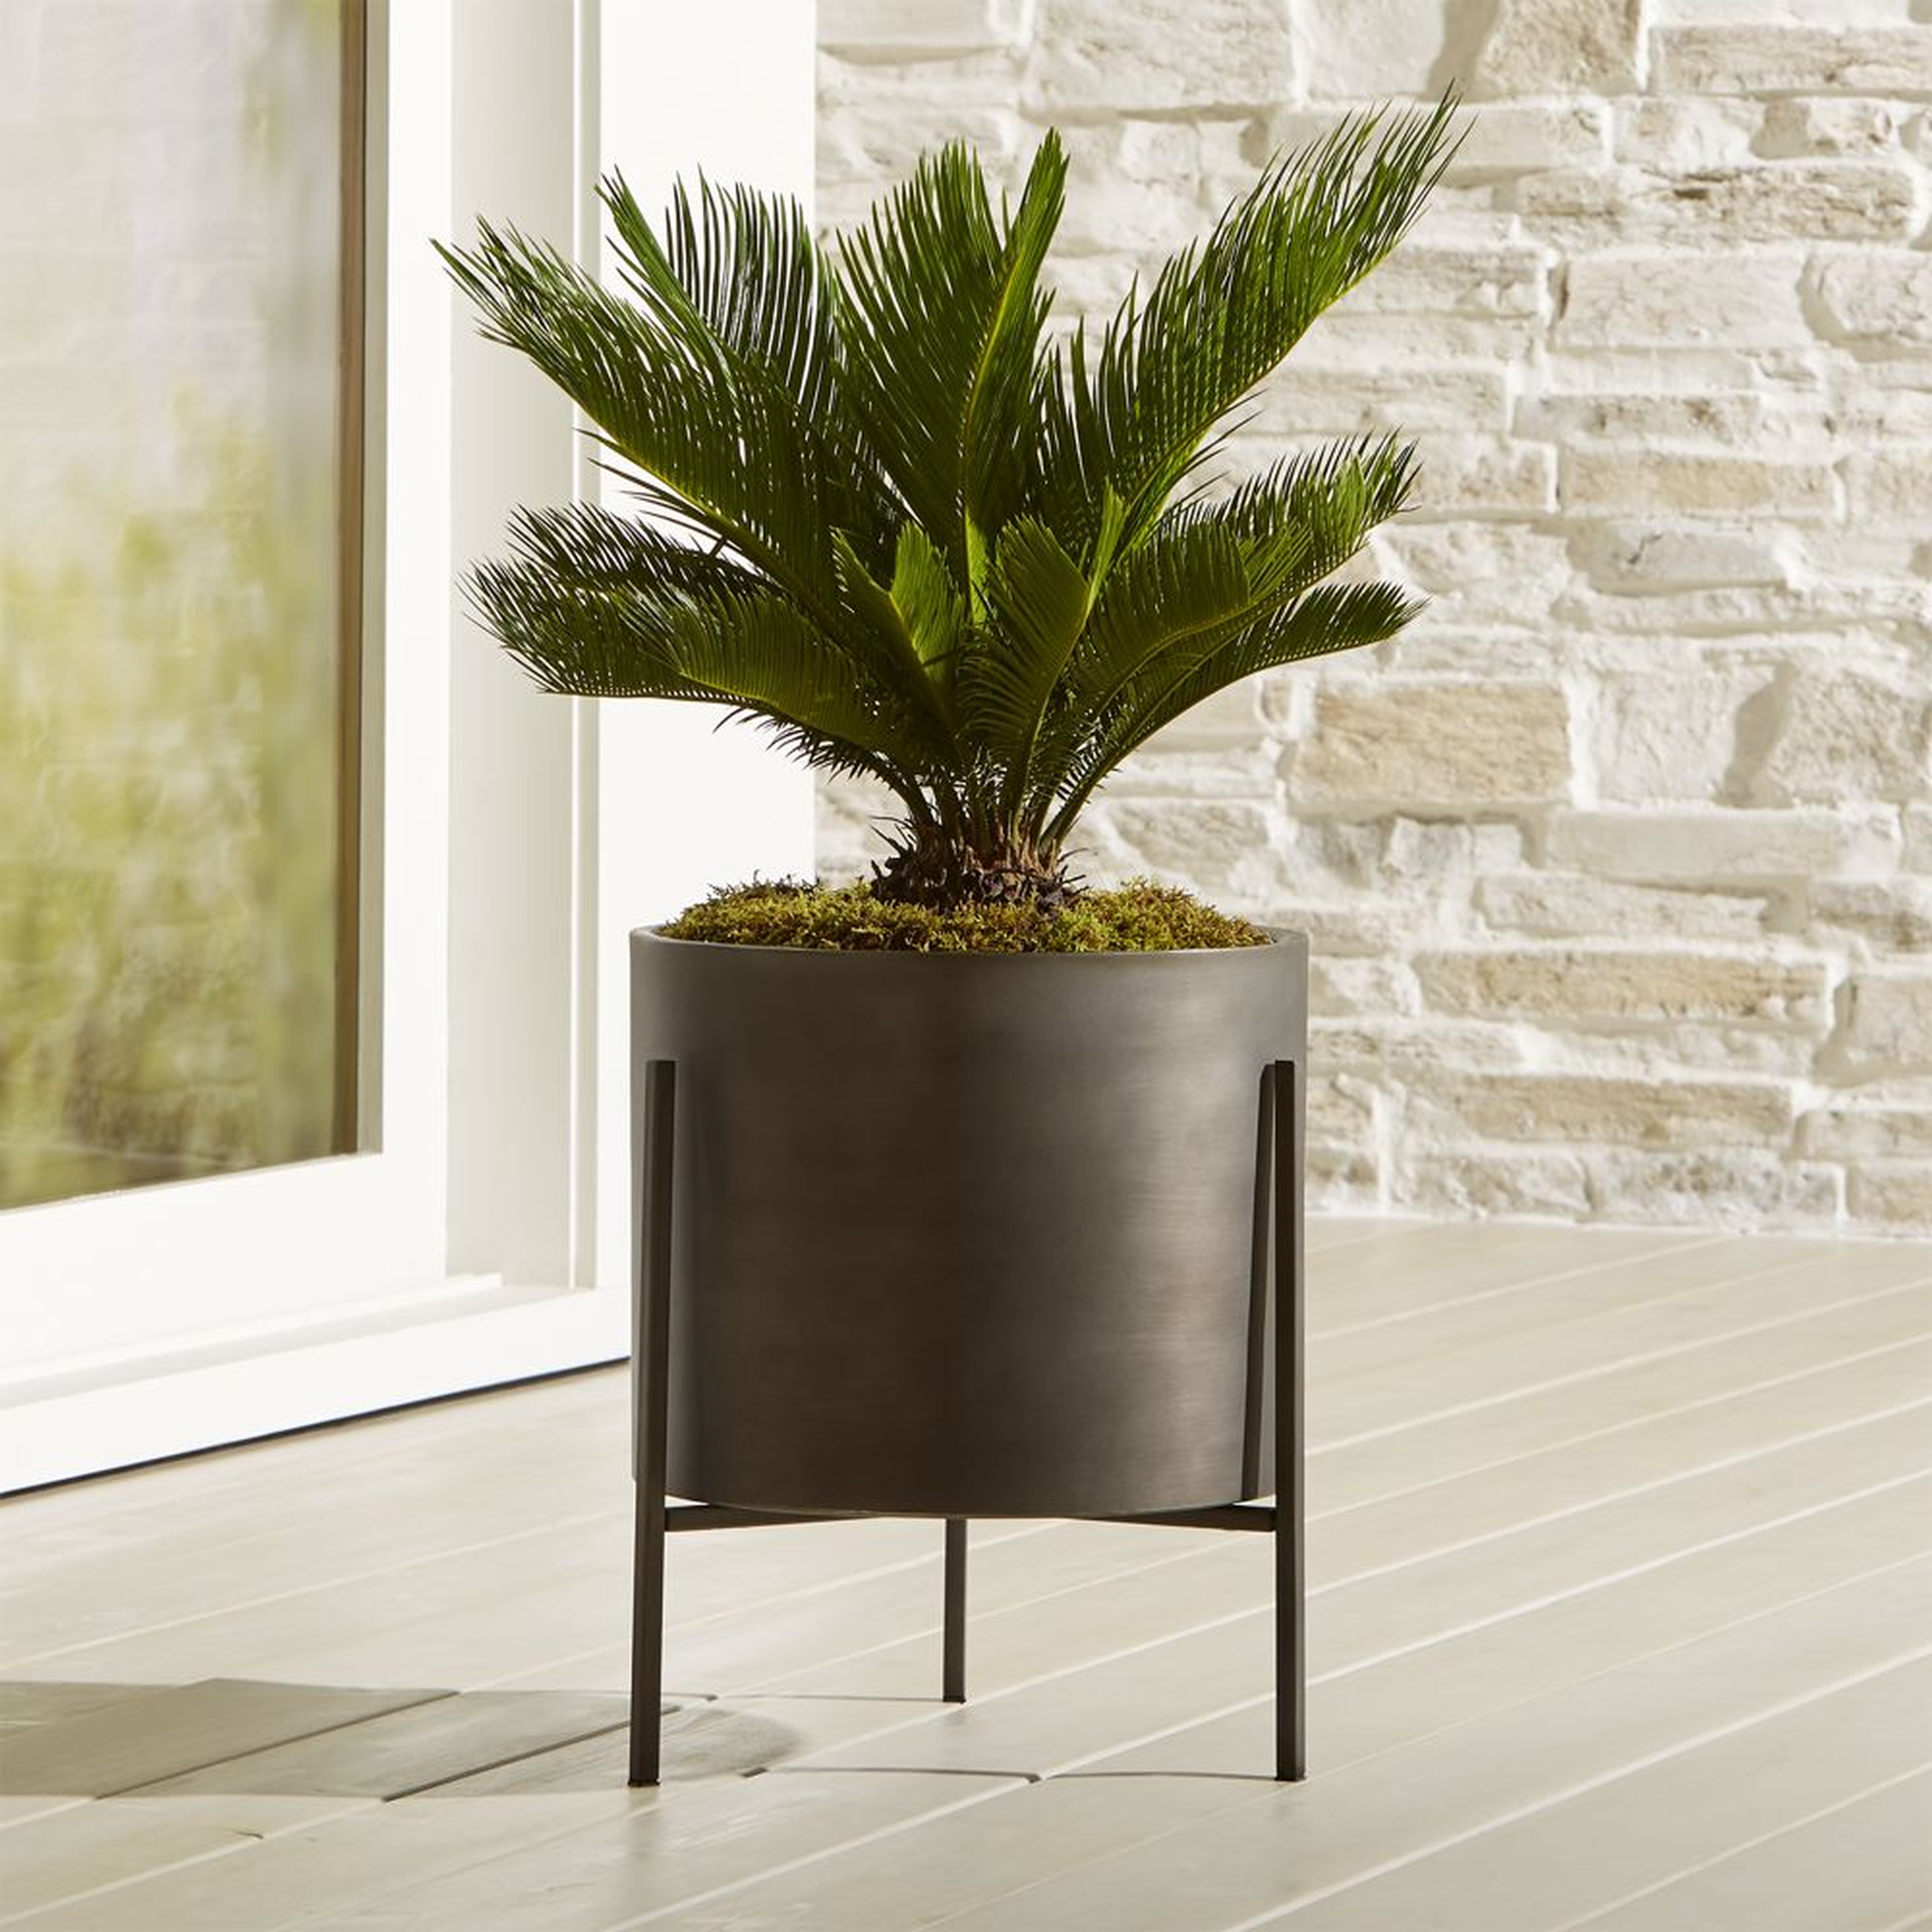 Dundee Low Planter with Stand - Crate and Barrel